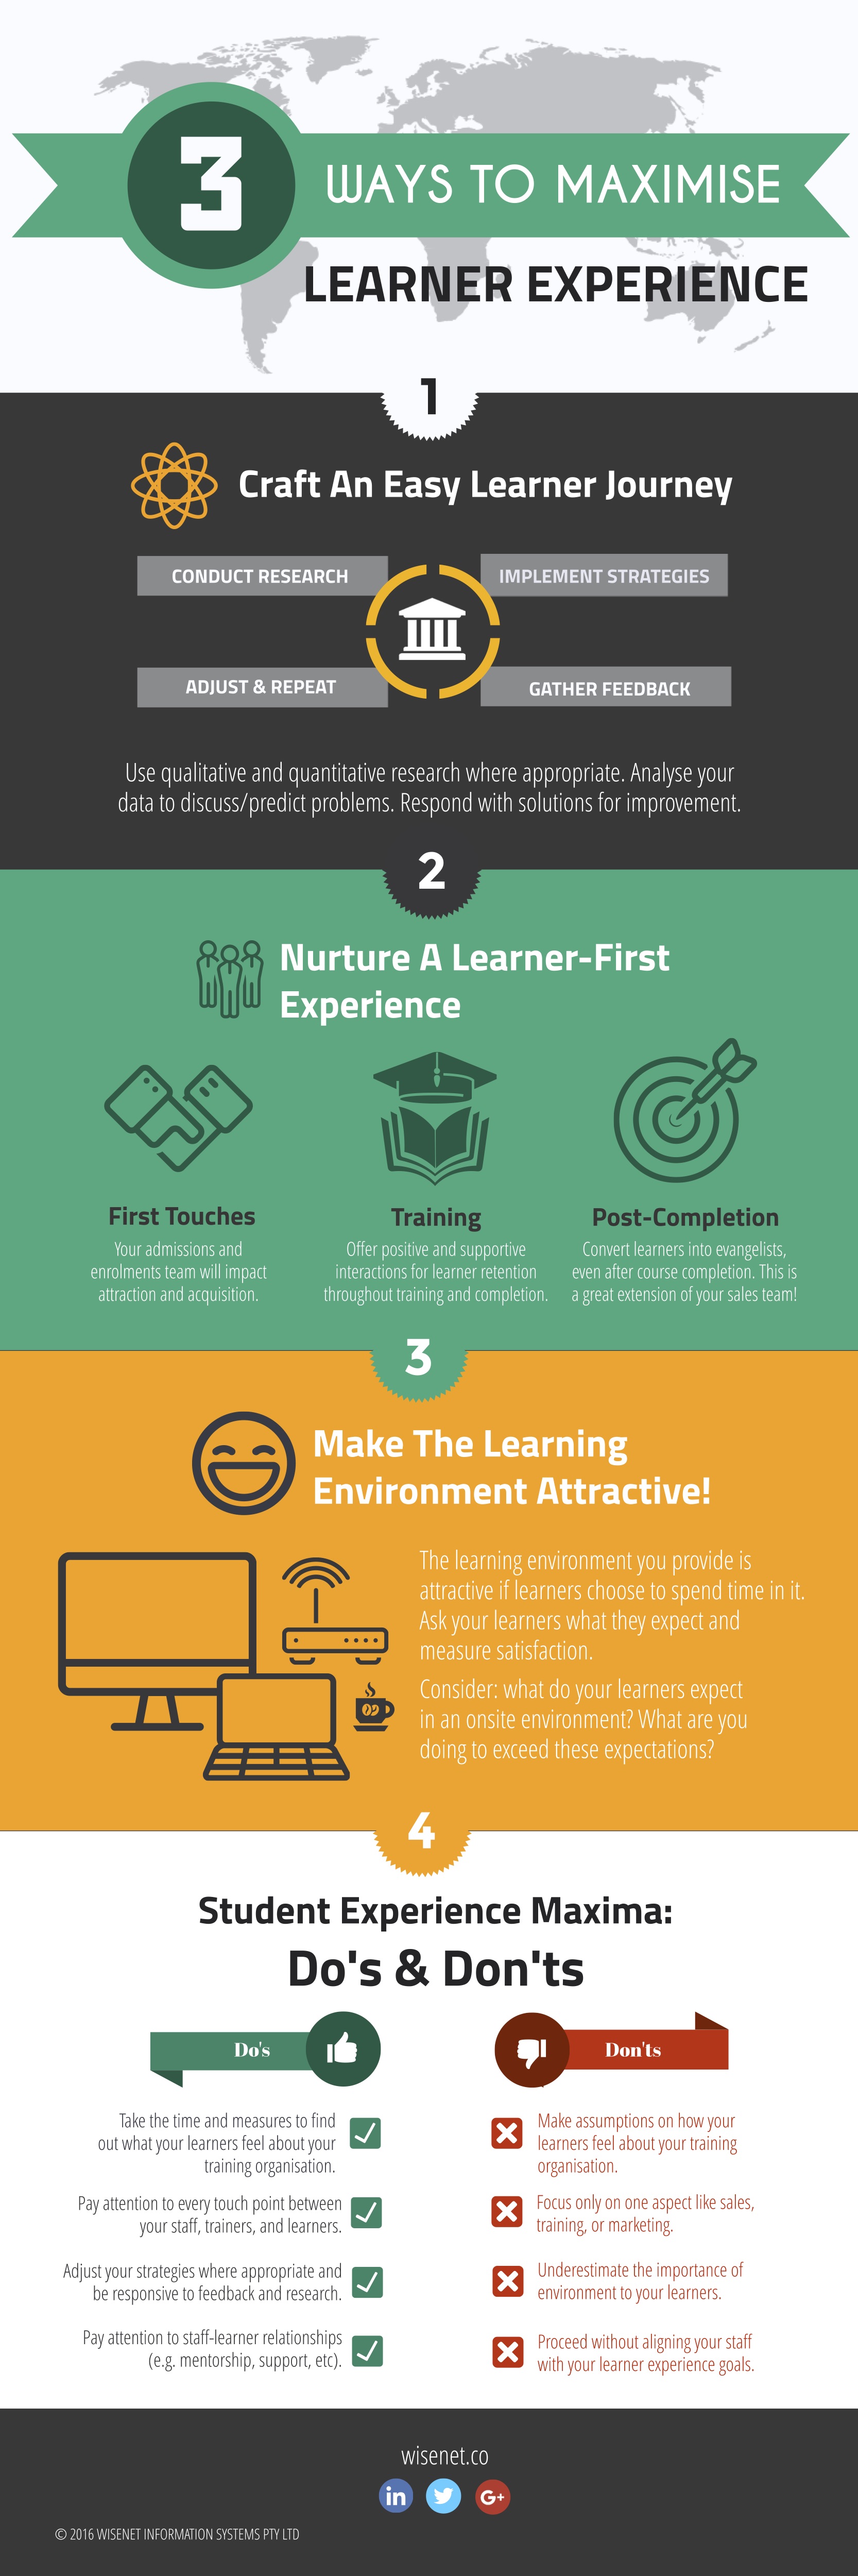 3_Ways_To_Maximise_The_Learner_Experience_by_Wisenet_2016.jpg